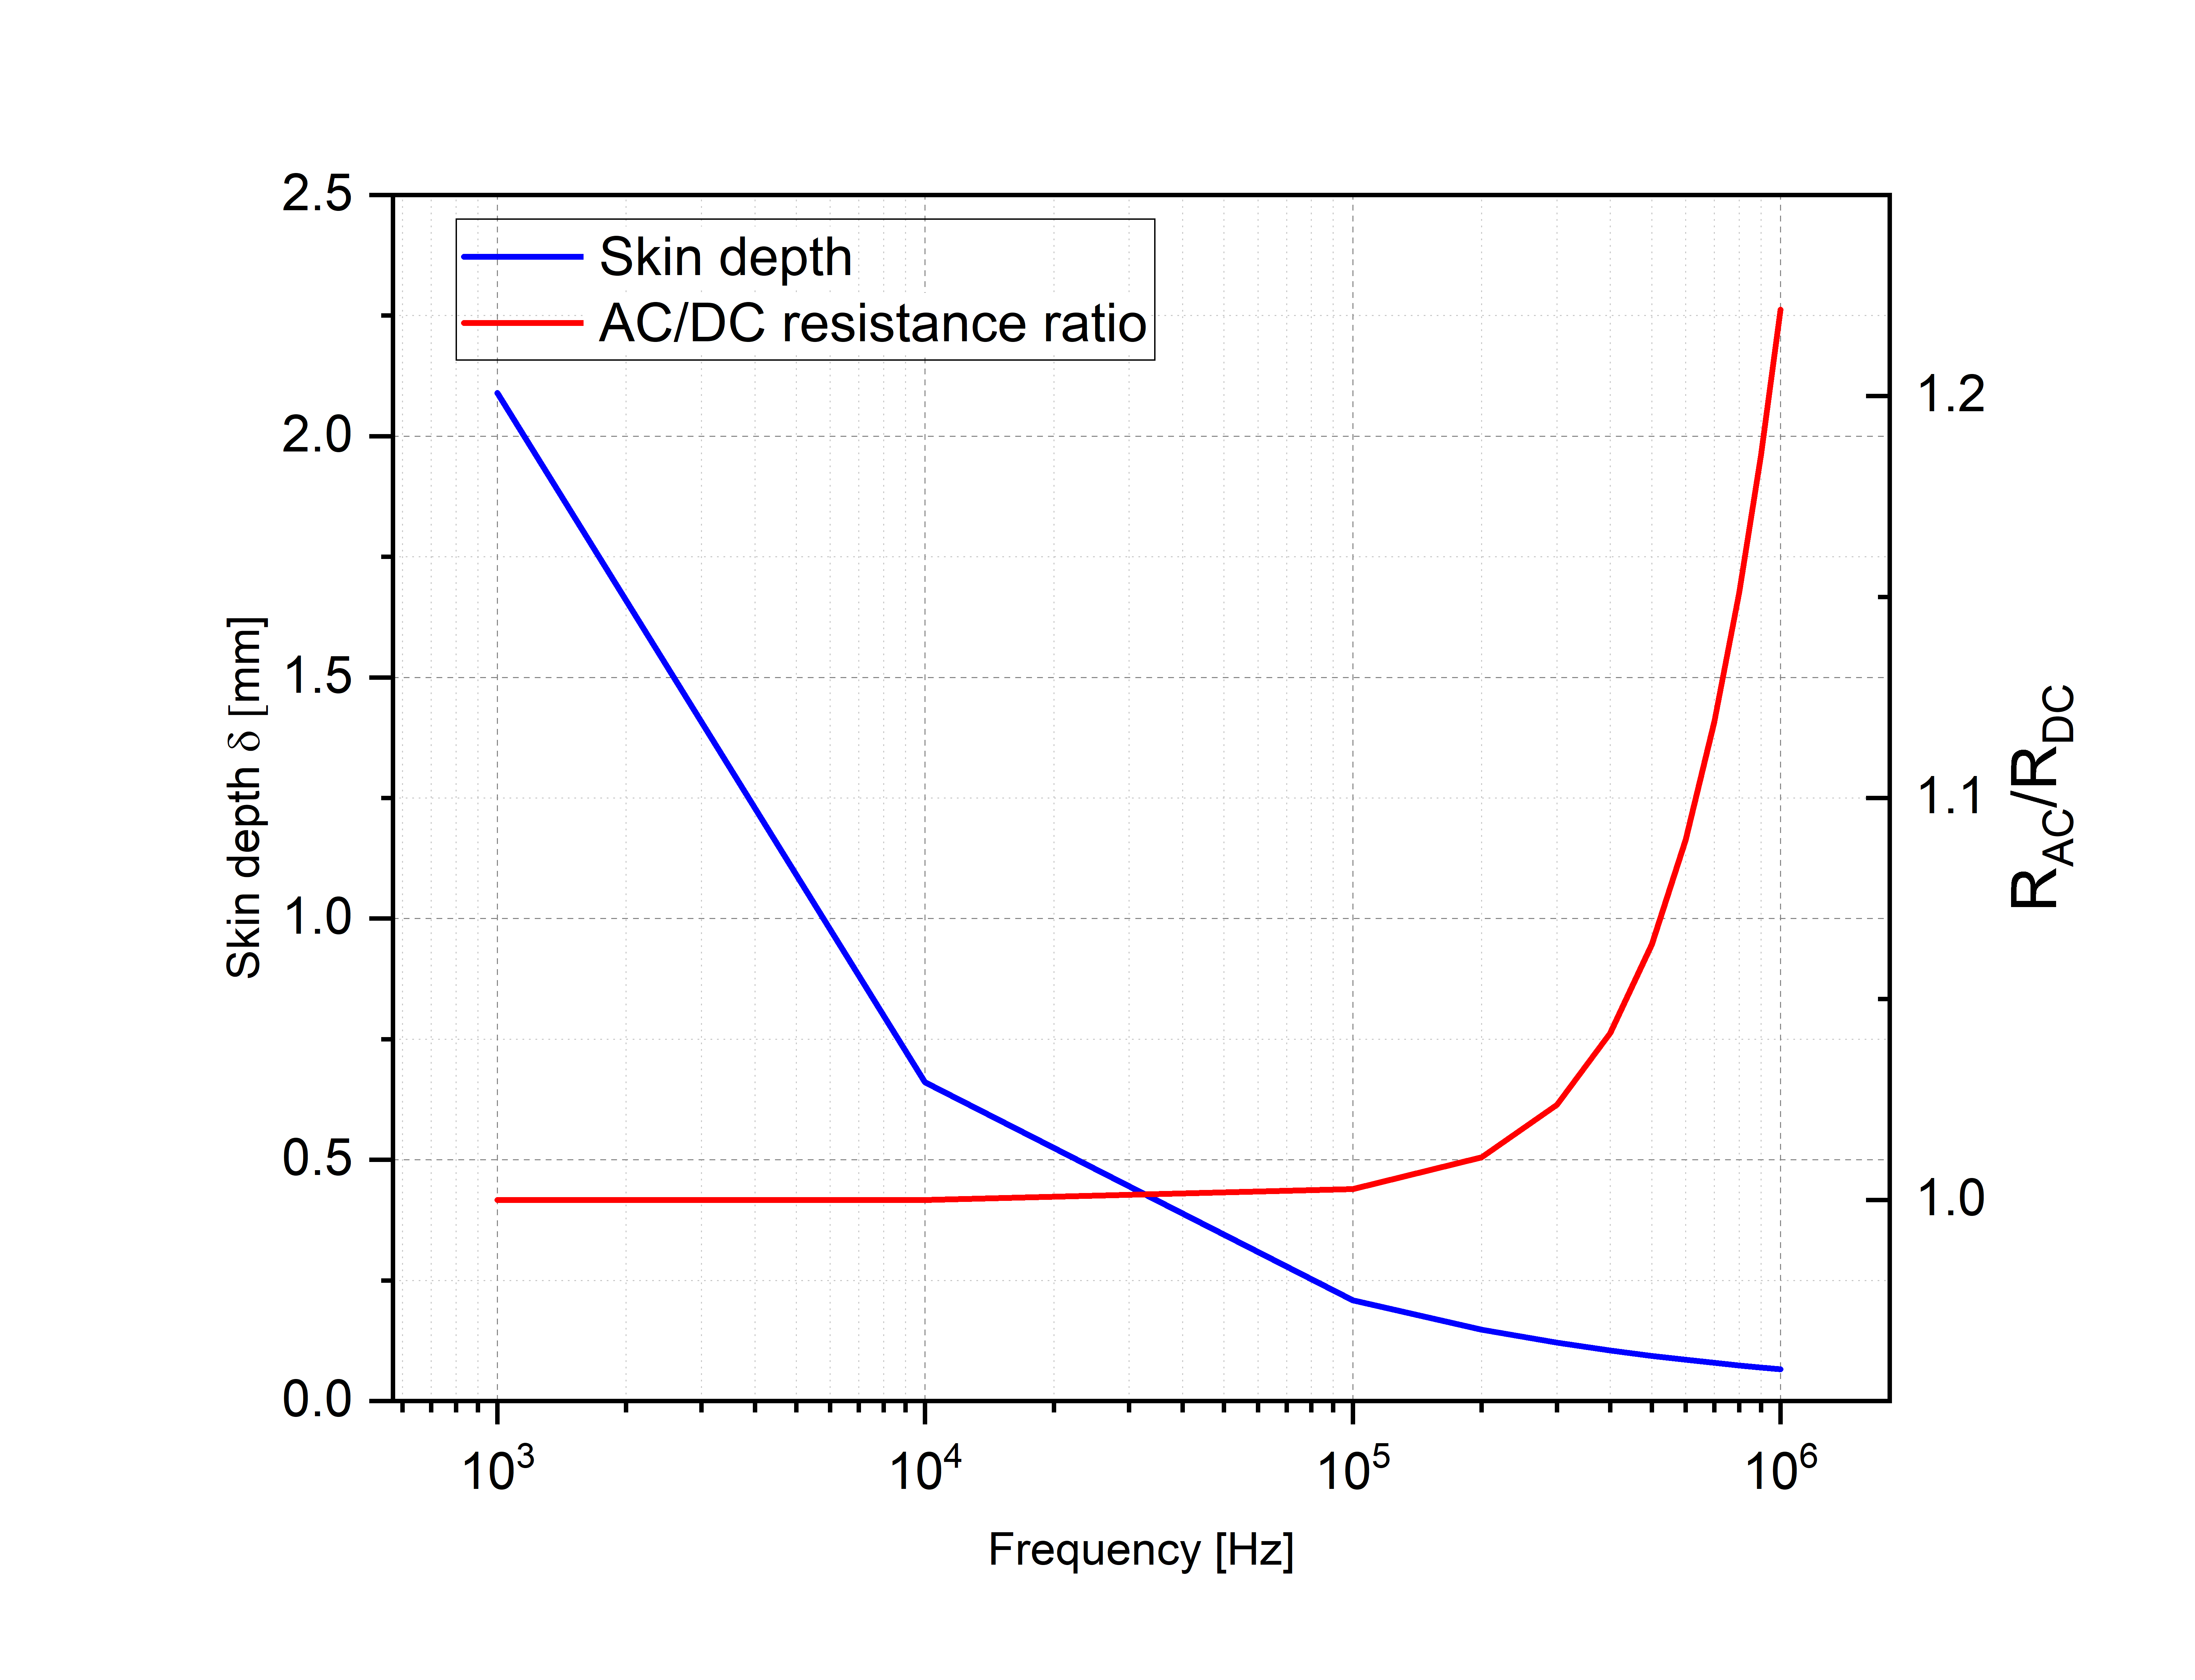 Skin depth and AC/DC resistance ratio variation versus frequency